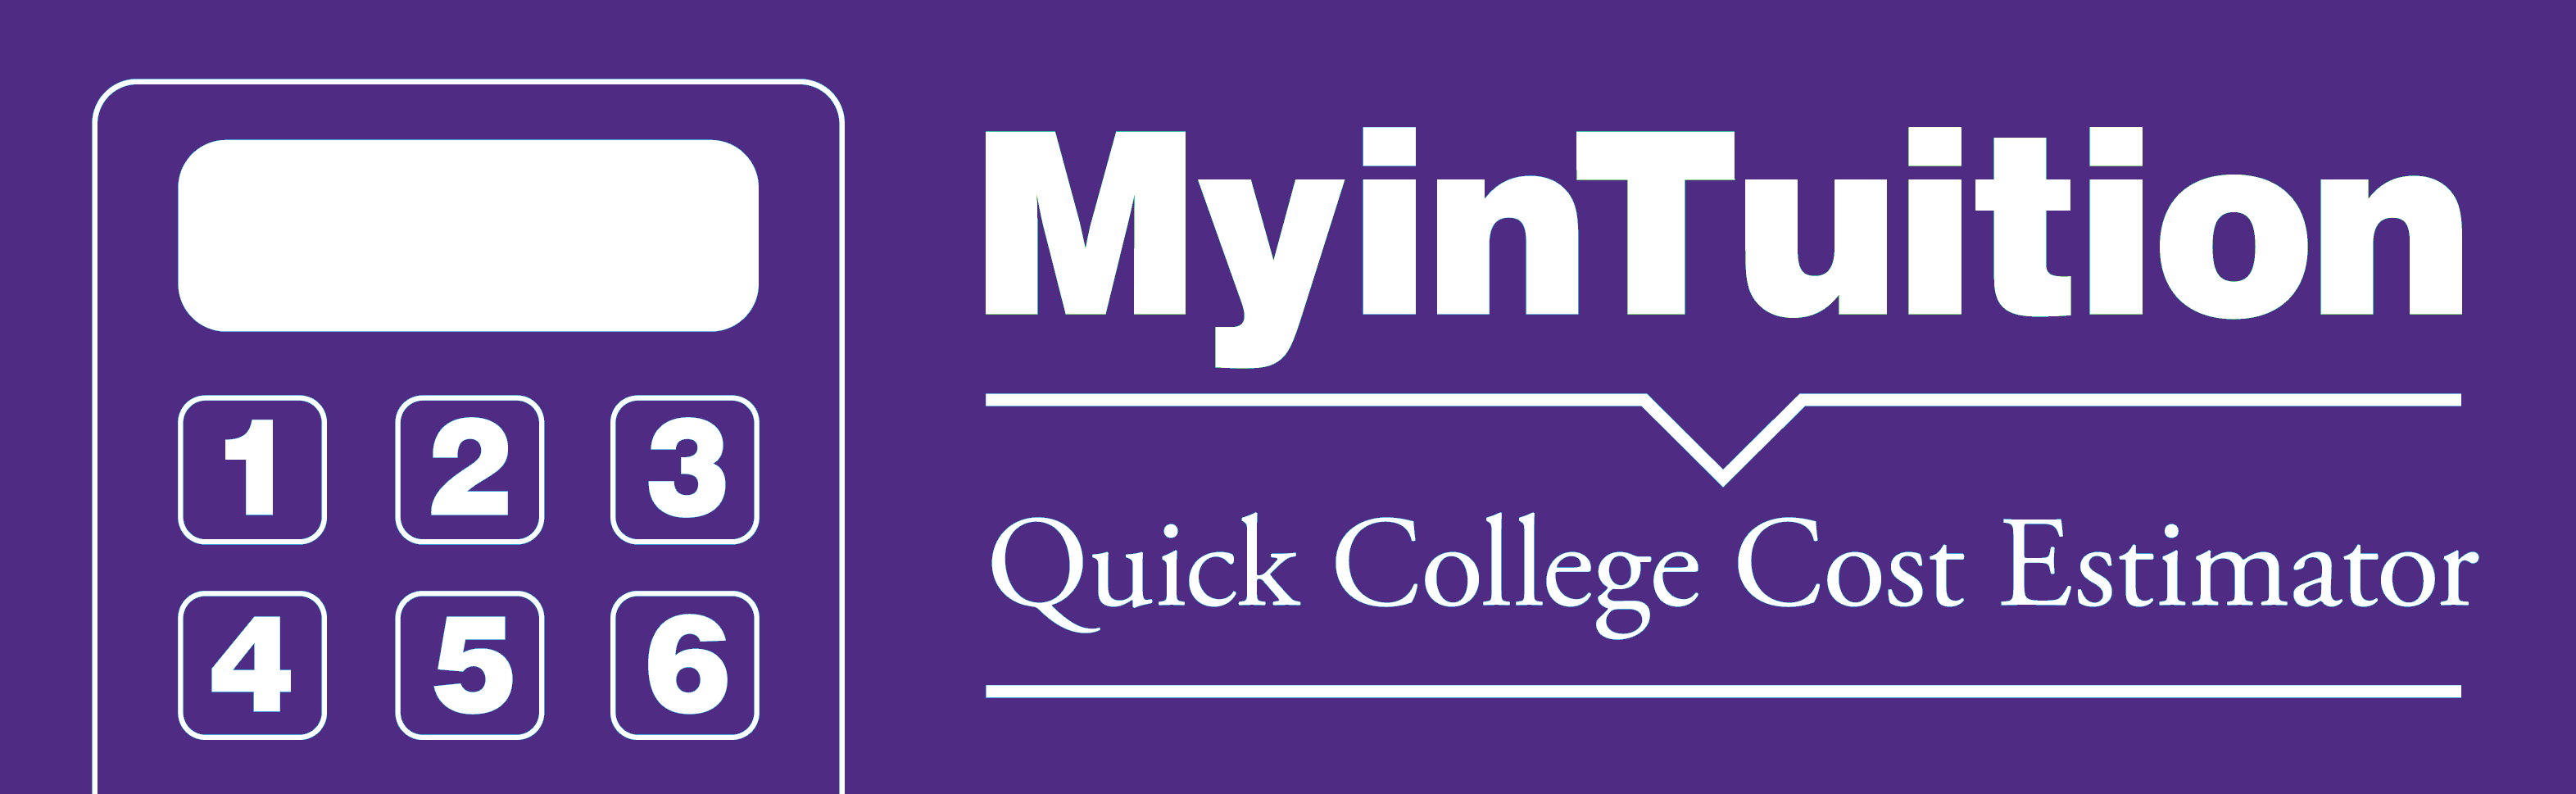 myintuition_banner_northwestern.png